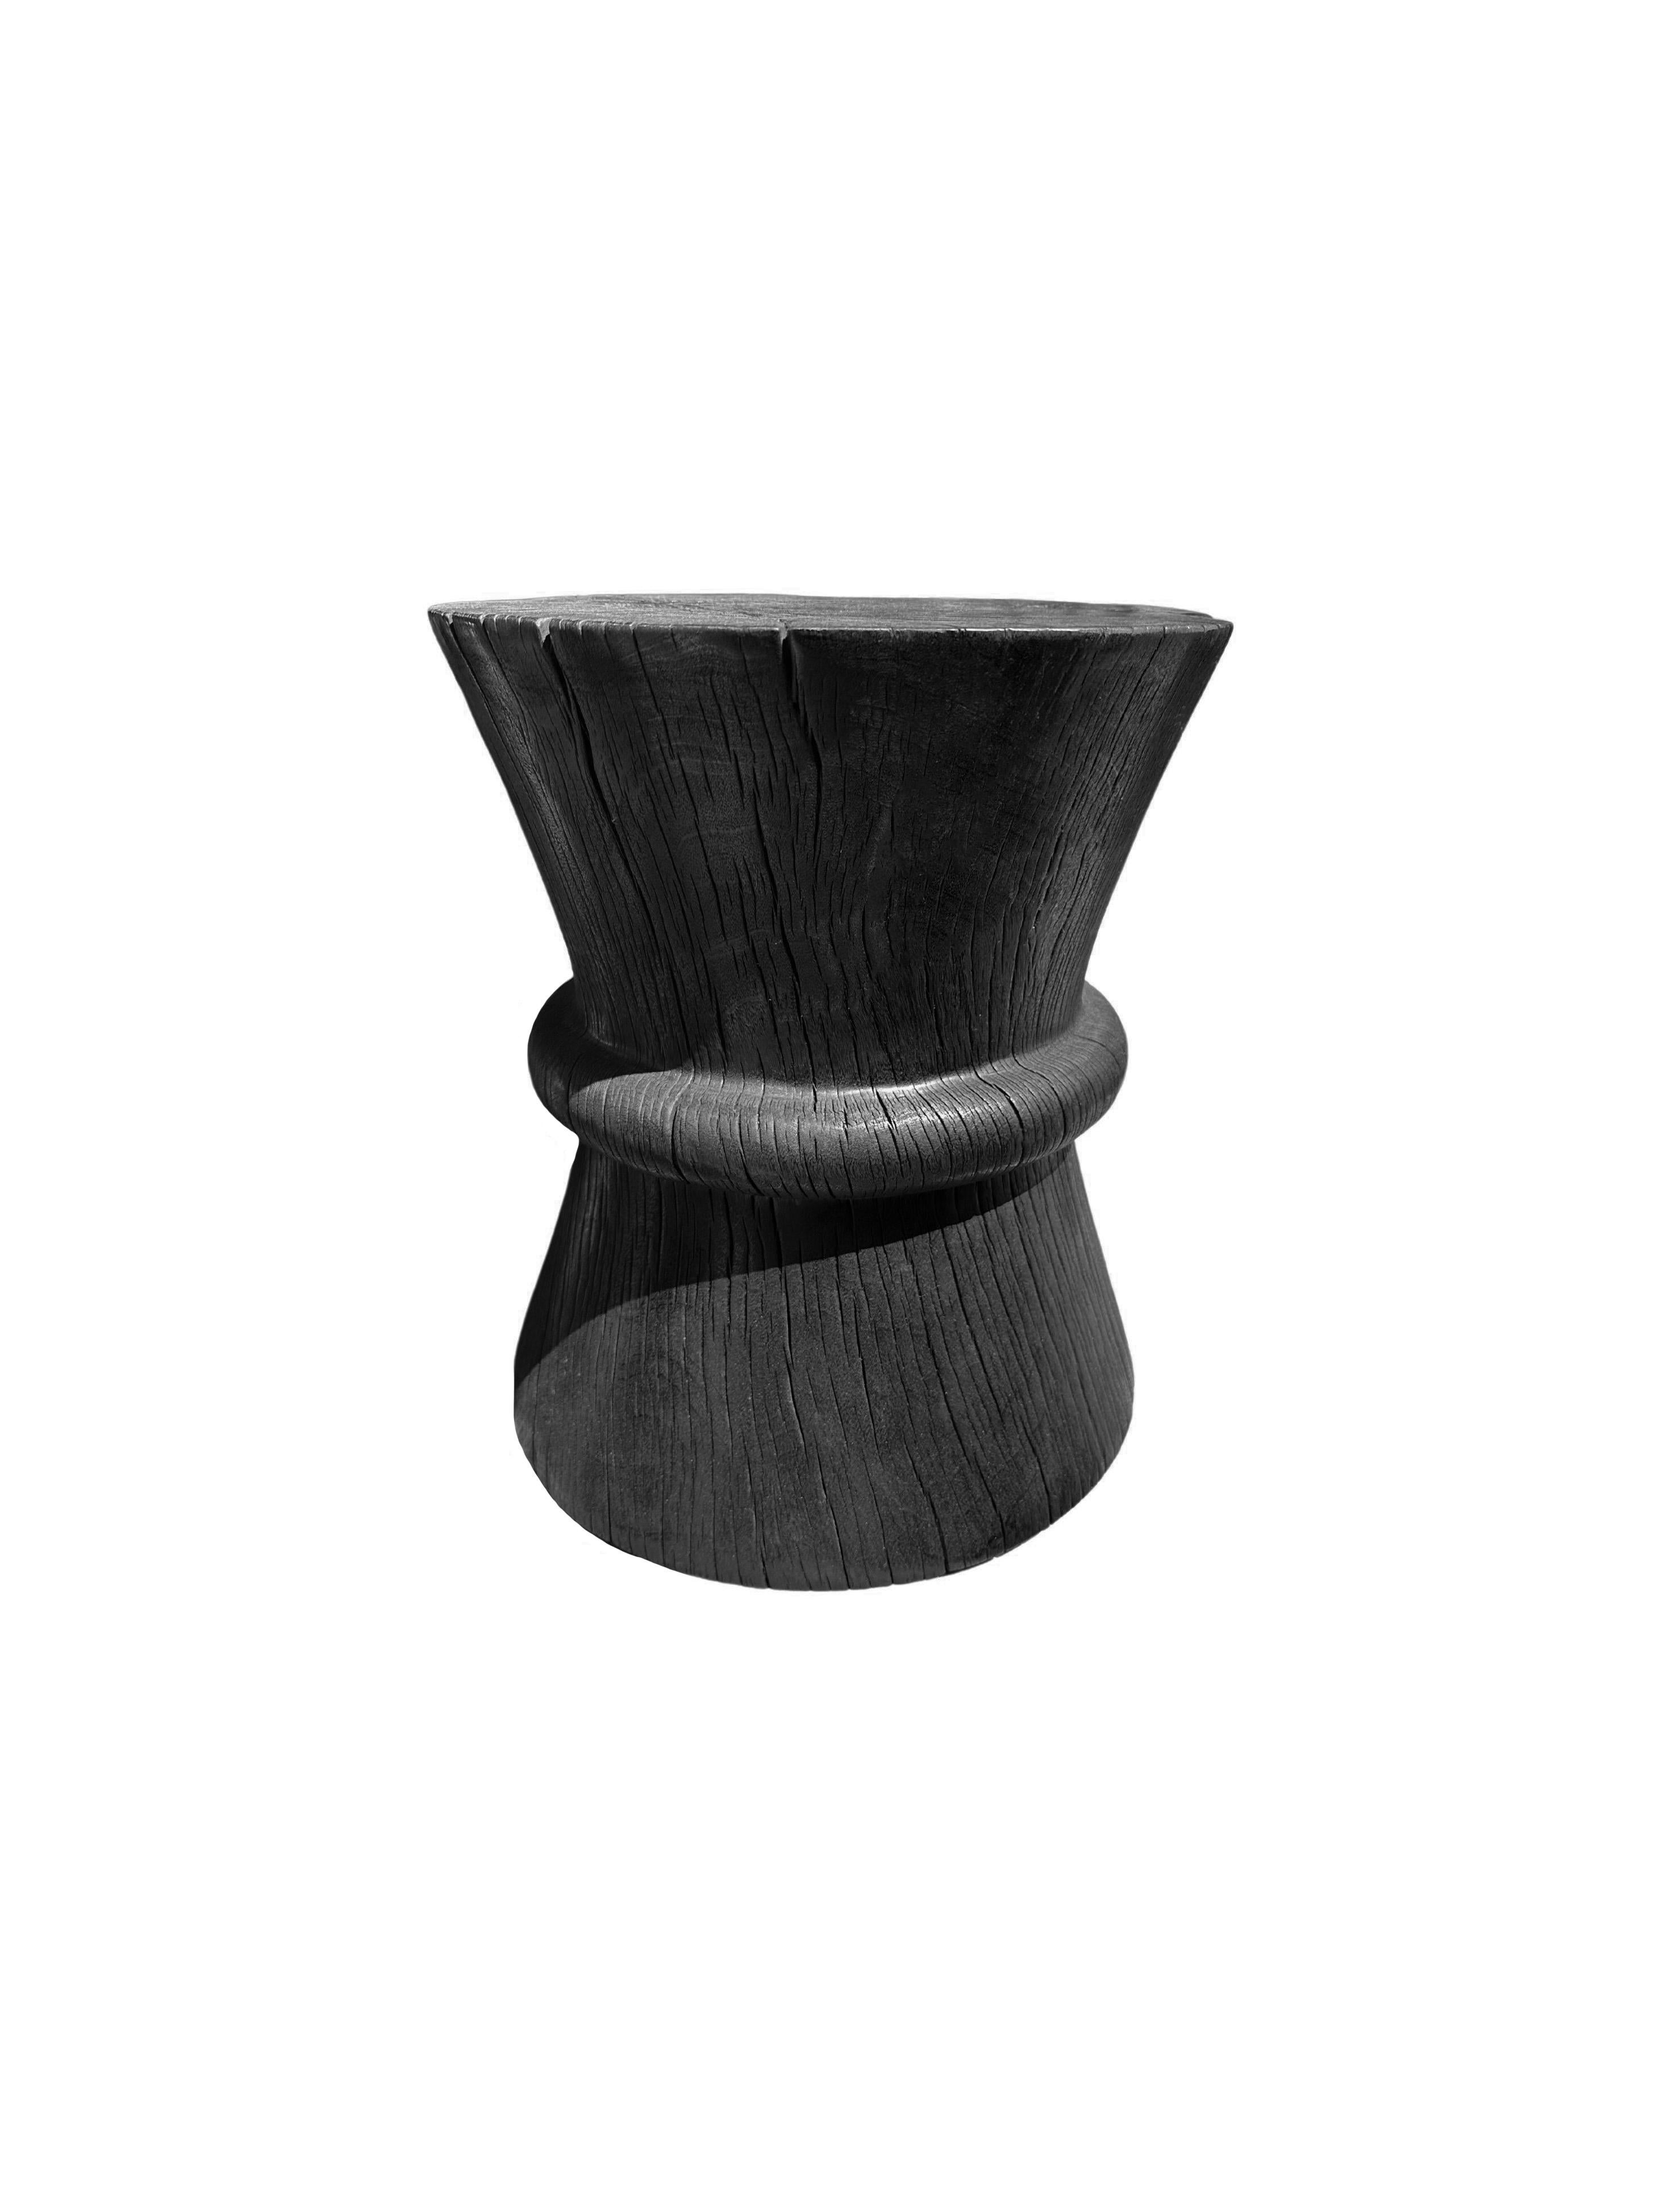 Hand-Crafted Sculptural Solid Tamarind Wood Table, Modern Organic, Burnt Finish For Sale